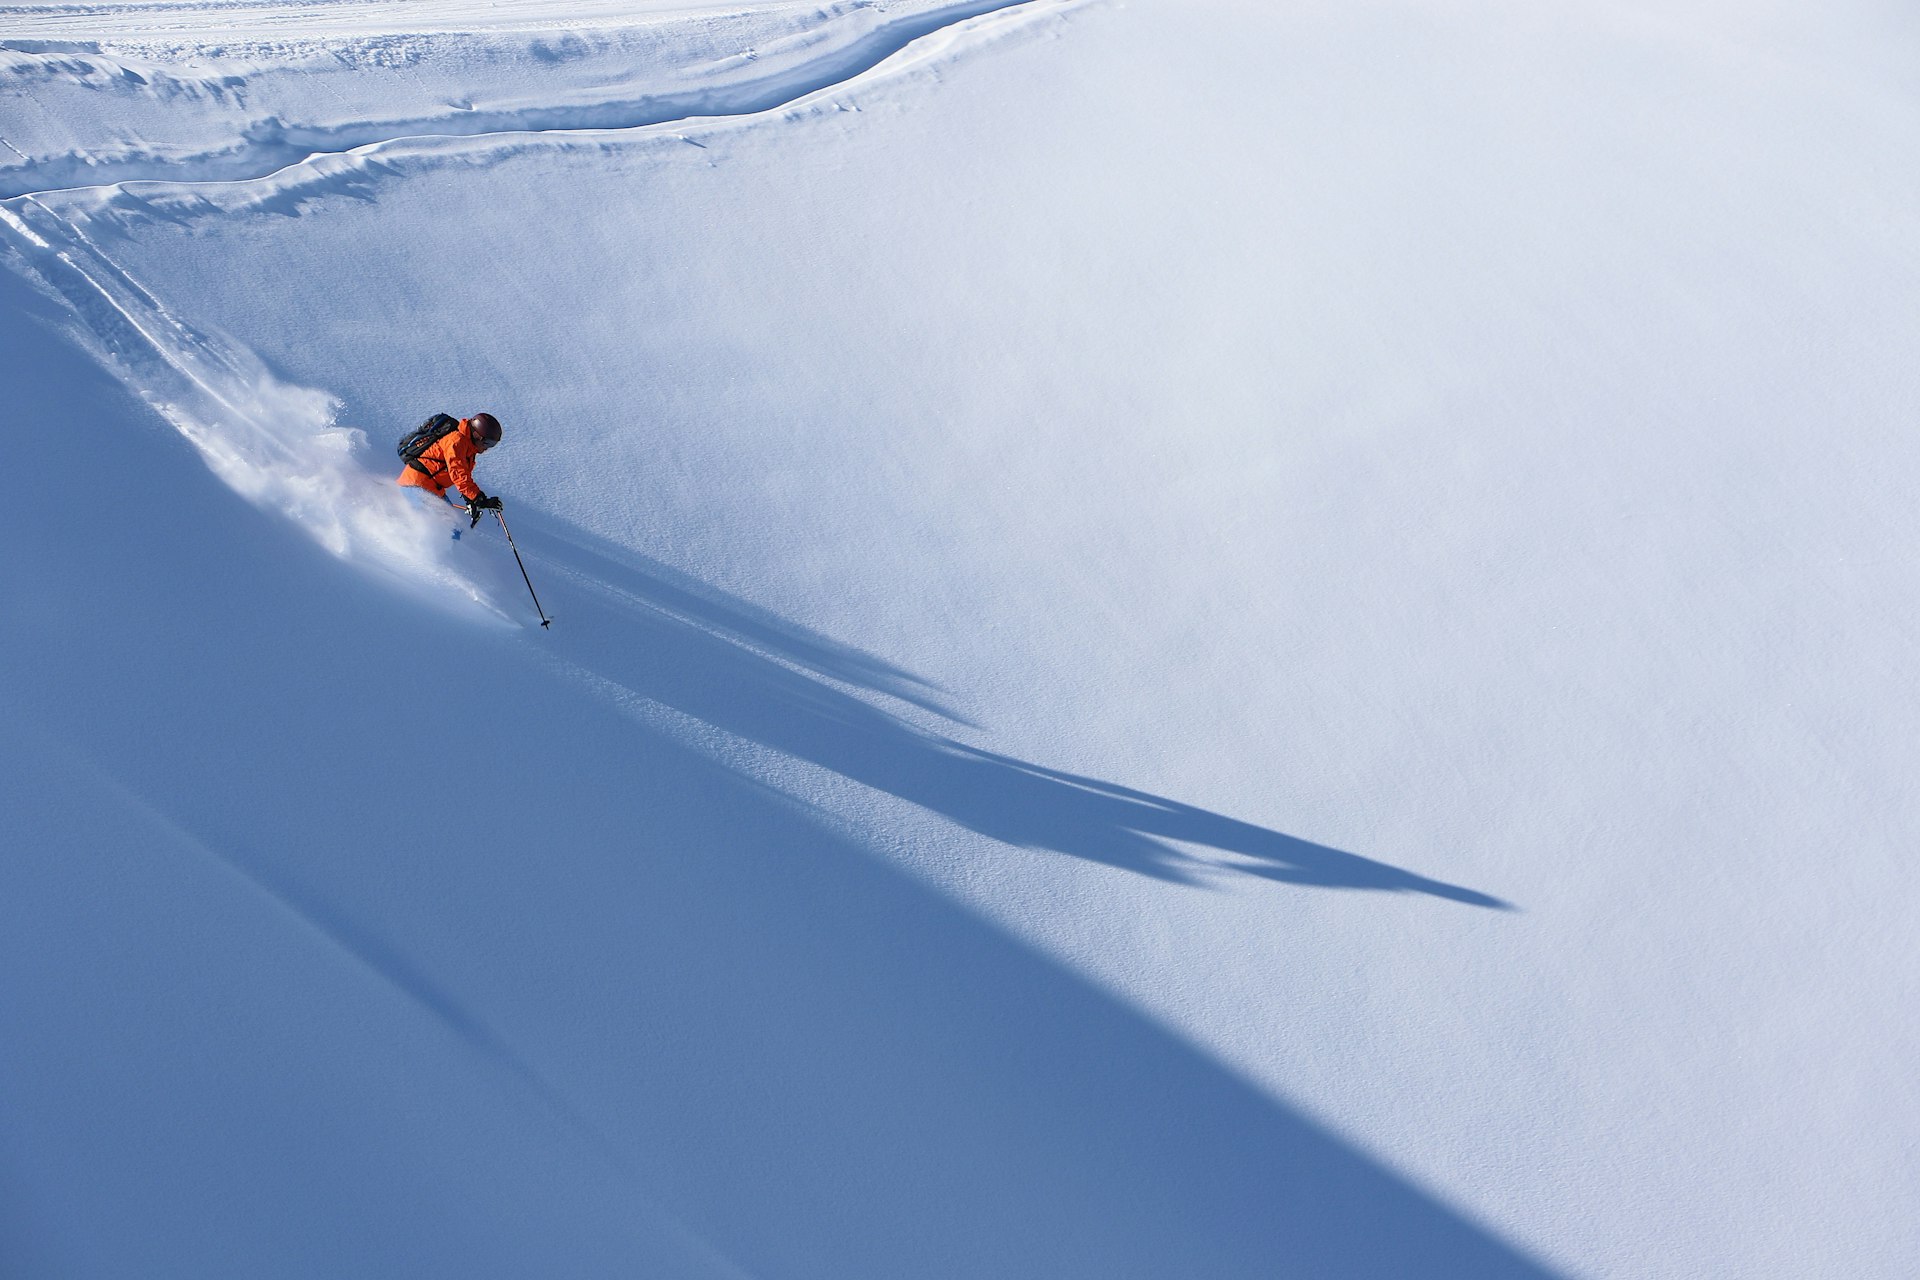 A single skier, dressed in a bright orange jacket, hurtles down a piste of perfect, untouched snow.